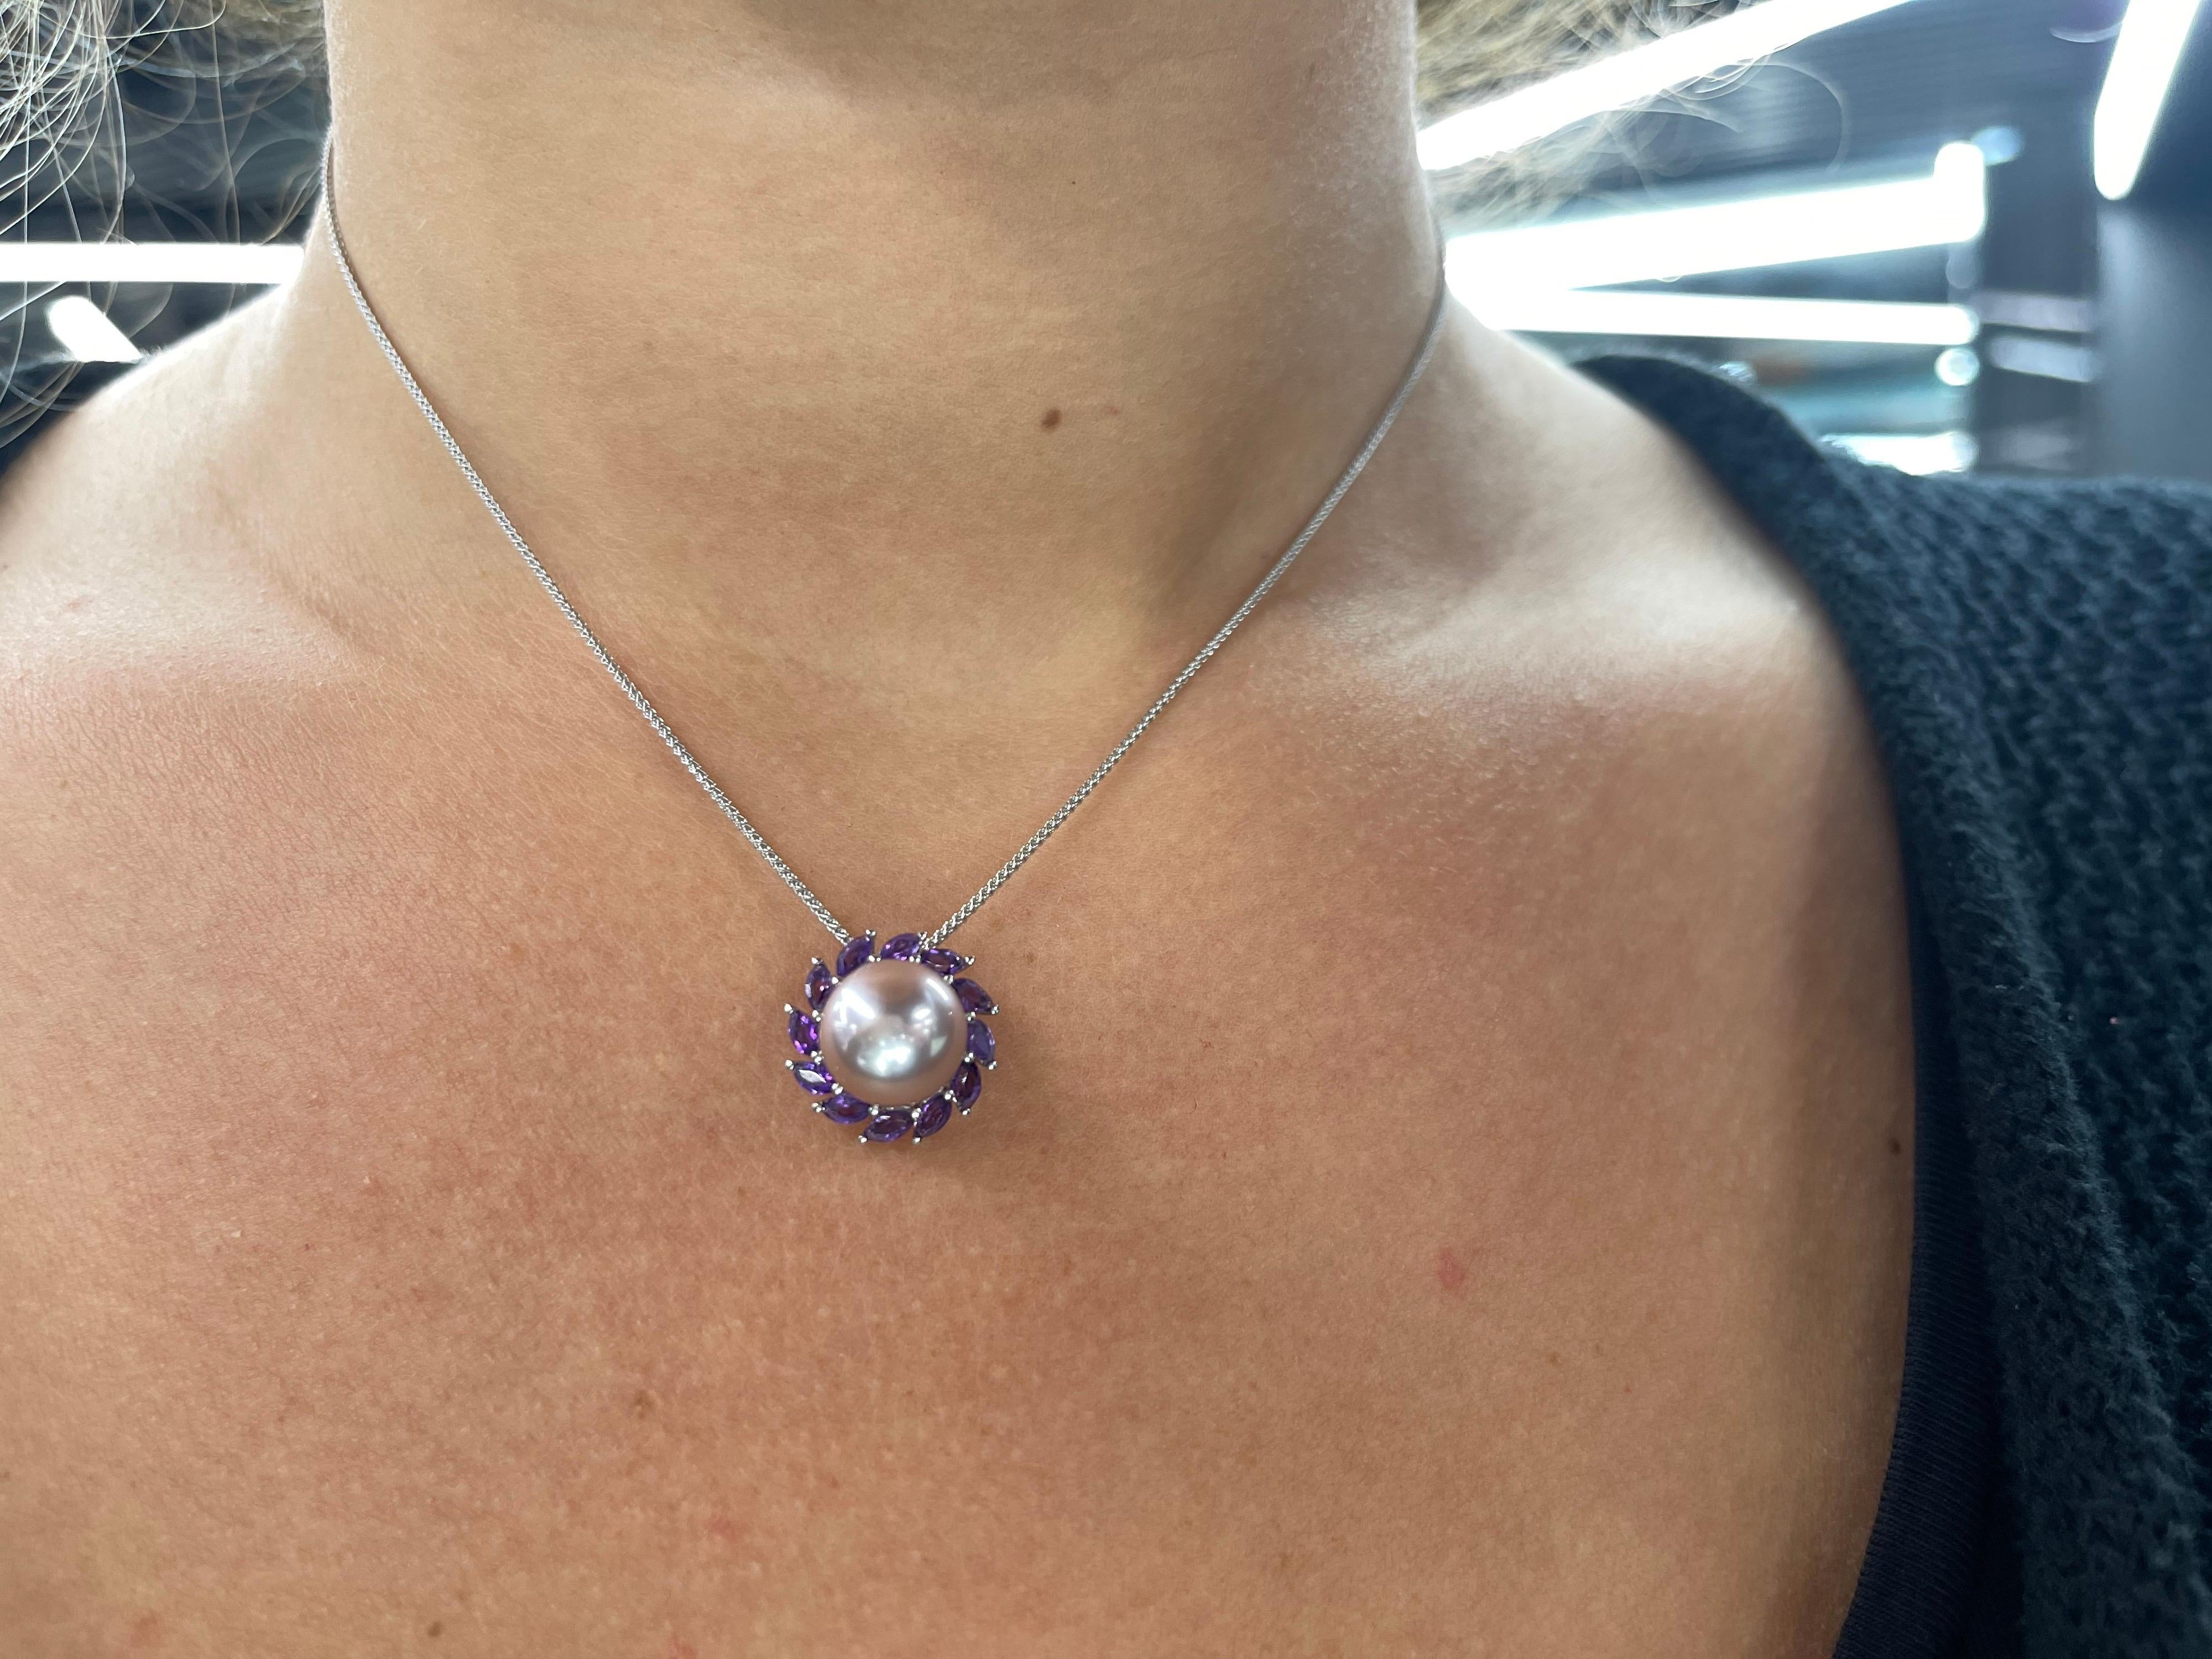 14 Karat White gold pendant featuring one Pink Freshwater Pearl measuring 13-14 mm flanked with 12 Marquise cut Amethyst weighing 0.91 carats.